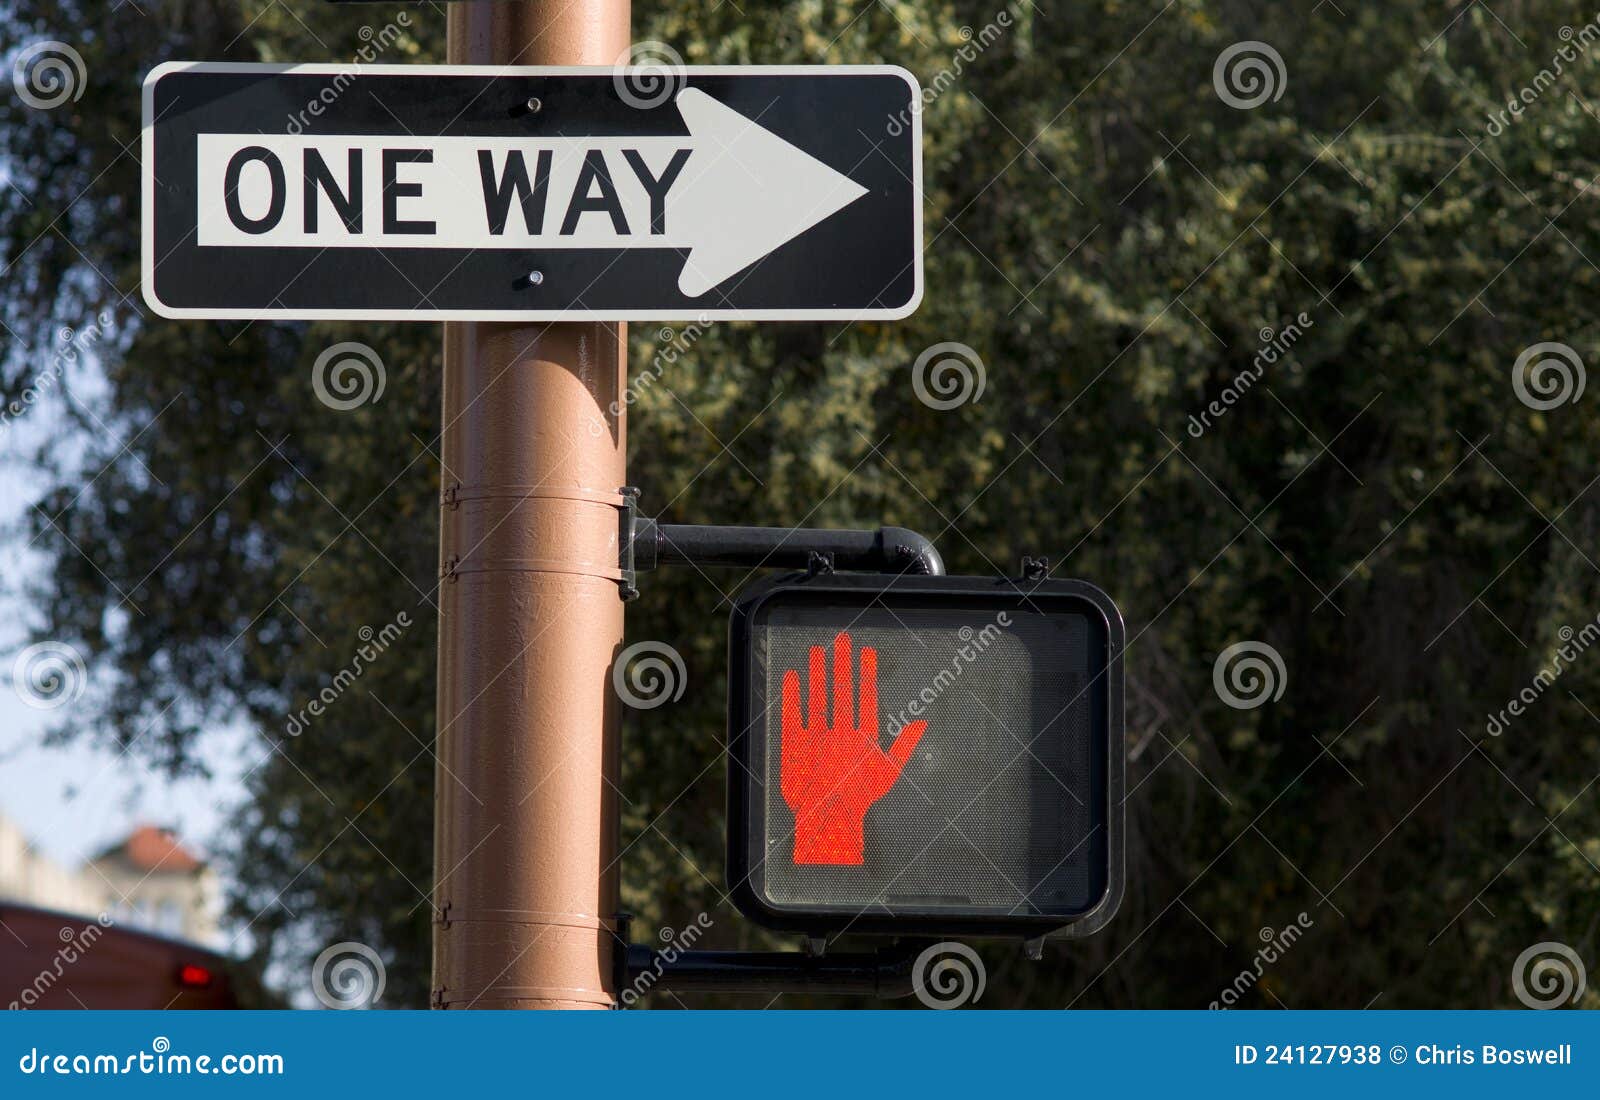 One Way Street Sign Downtown Dont Walk Signal Stock Photo - Image of ... One Way Street Signs